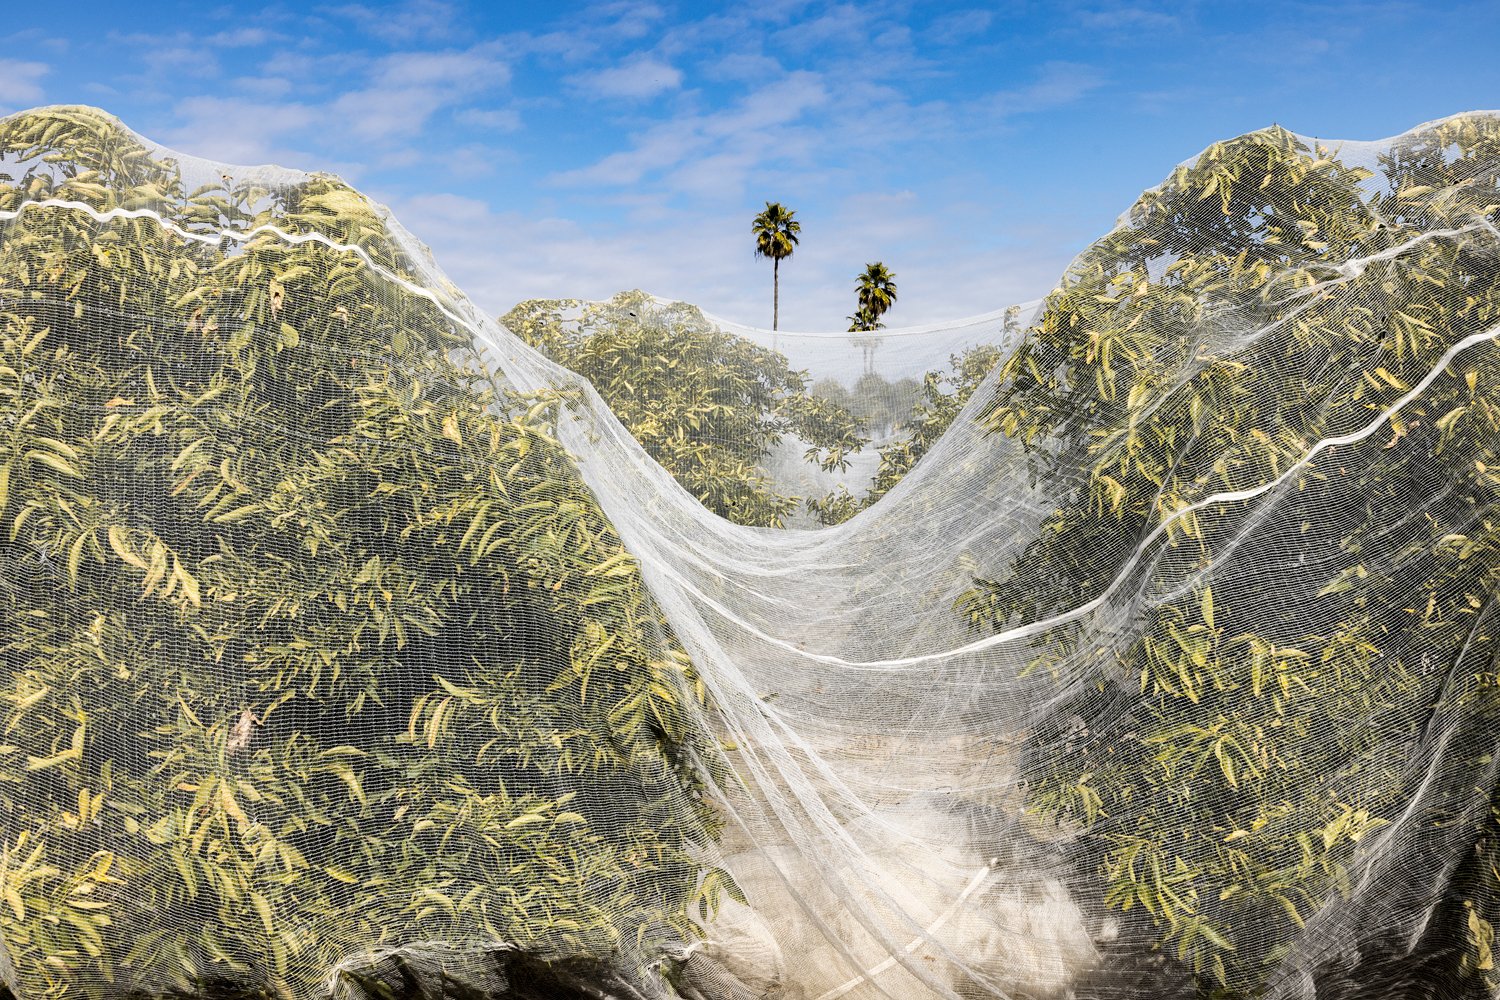   Netted Orange Grove &amp; Palm Trees, Study #2. Reedly, CA 2023 (36°36'19.8" N 119°34'30.258" W)  